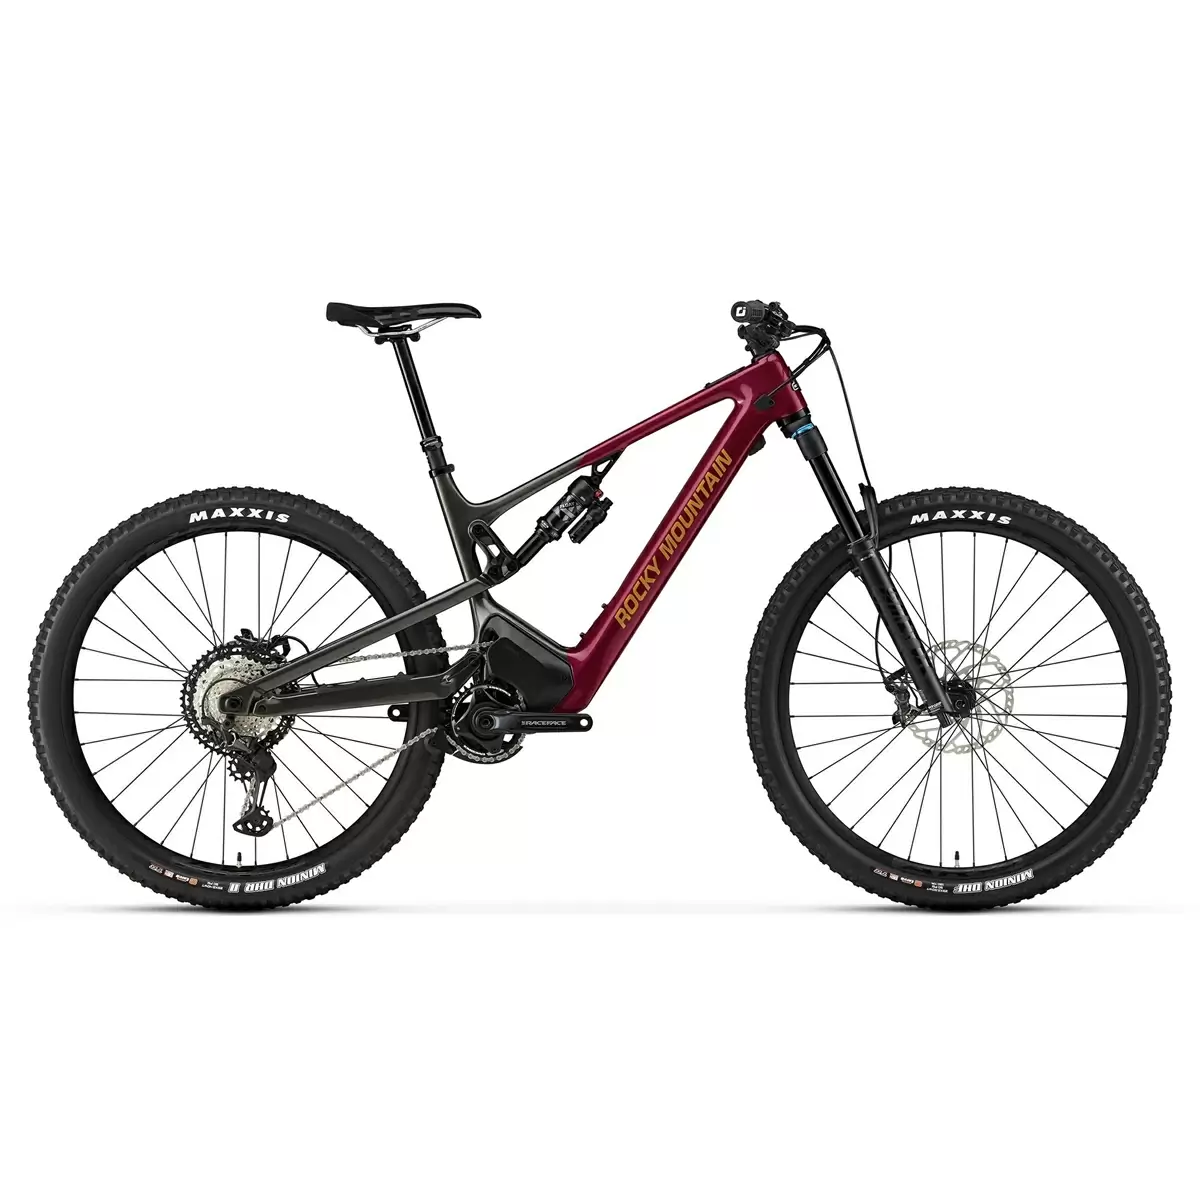 Instinct PowerPlay Carbon 70 29'' 150mm 12s 720Wh Grey/Red 2022 Size S - image